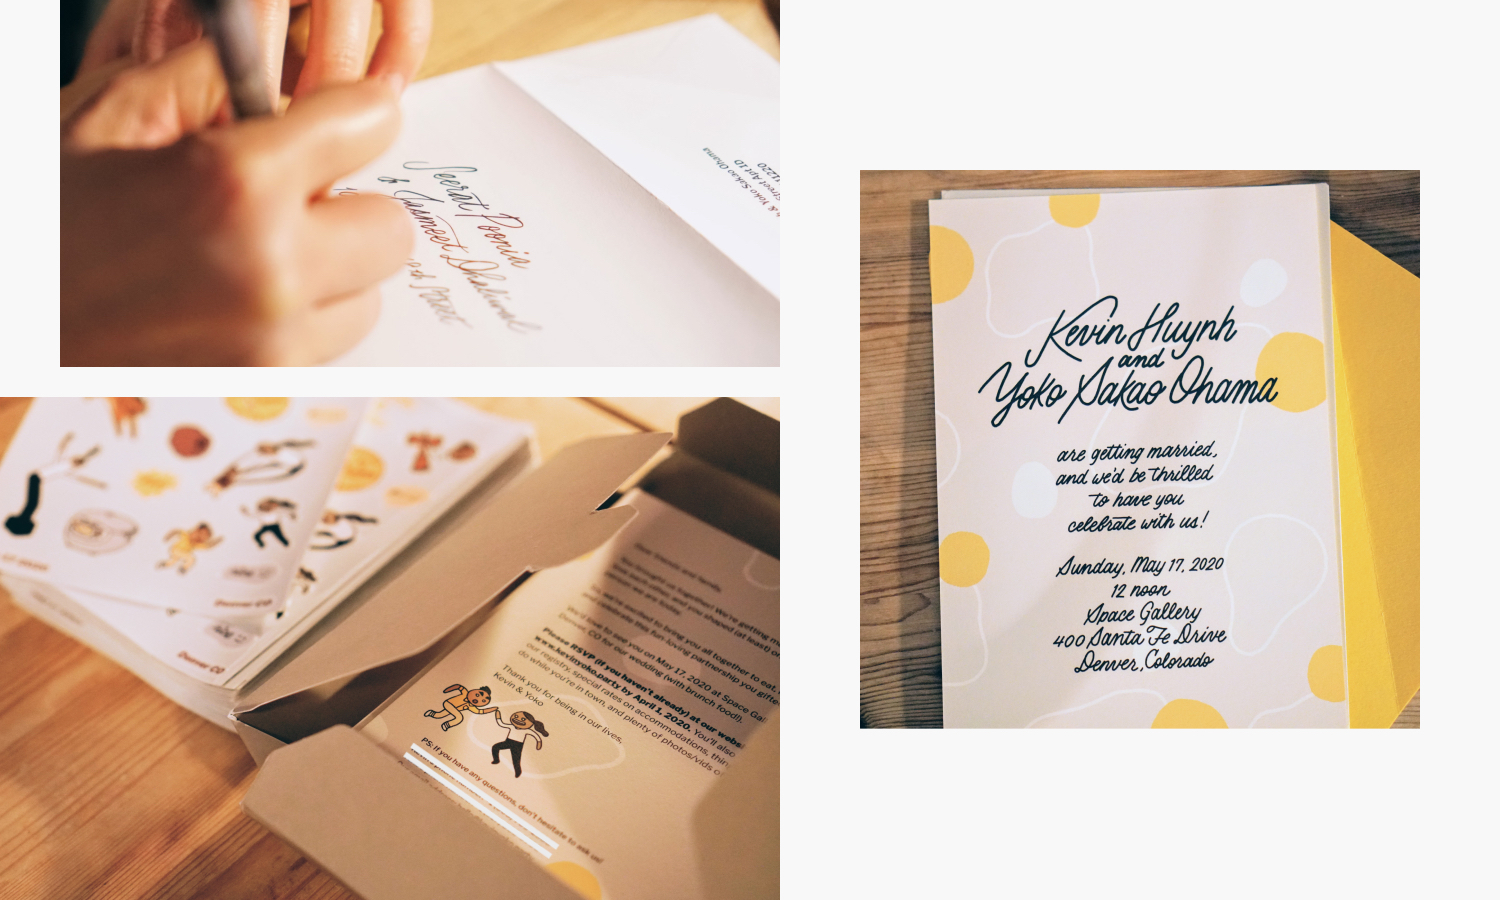 A collage of three photos: Top left, I’m addressing an envelope by hand with a brush pen; bottom left: a stack of our invitations with Kevin’s note facing up next to a stack of our sticker sheets; on the right: the front side of our invitation, on a yellow envelope liner.